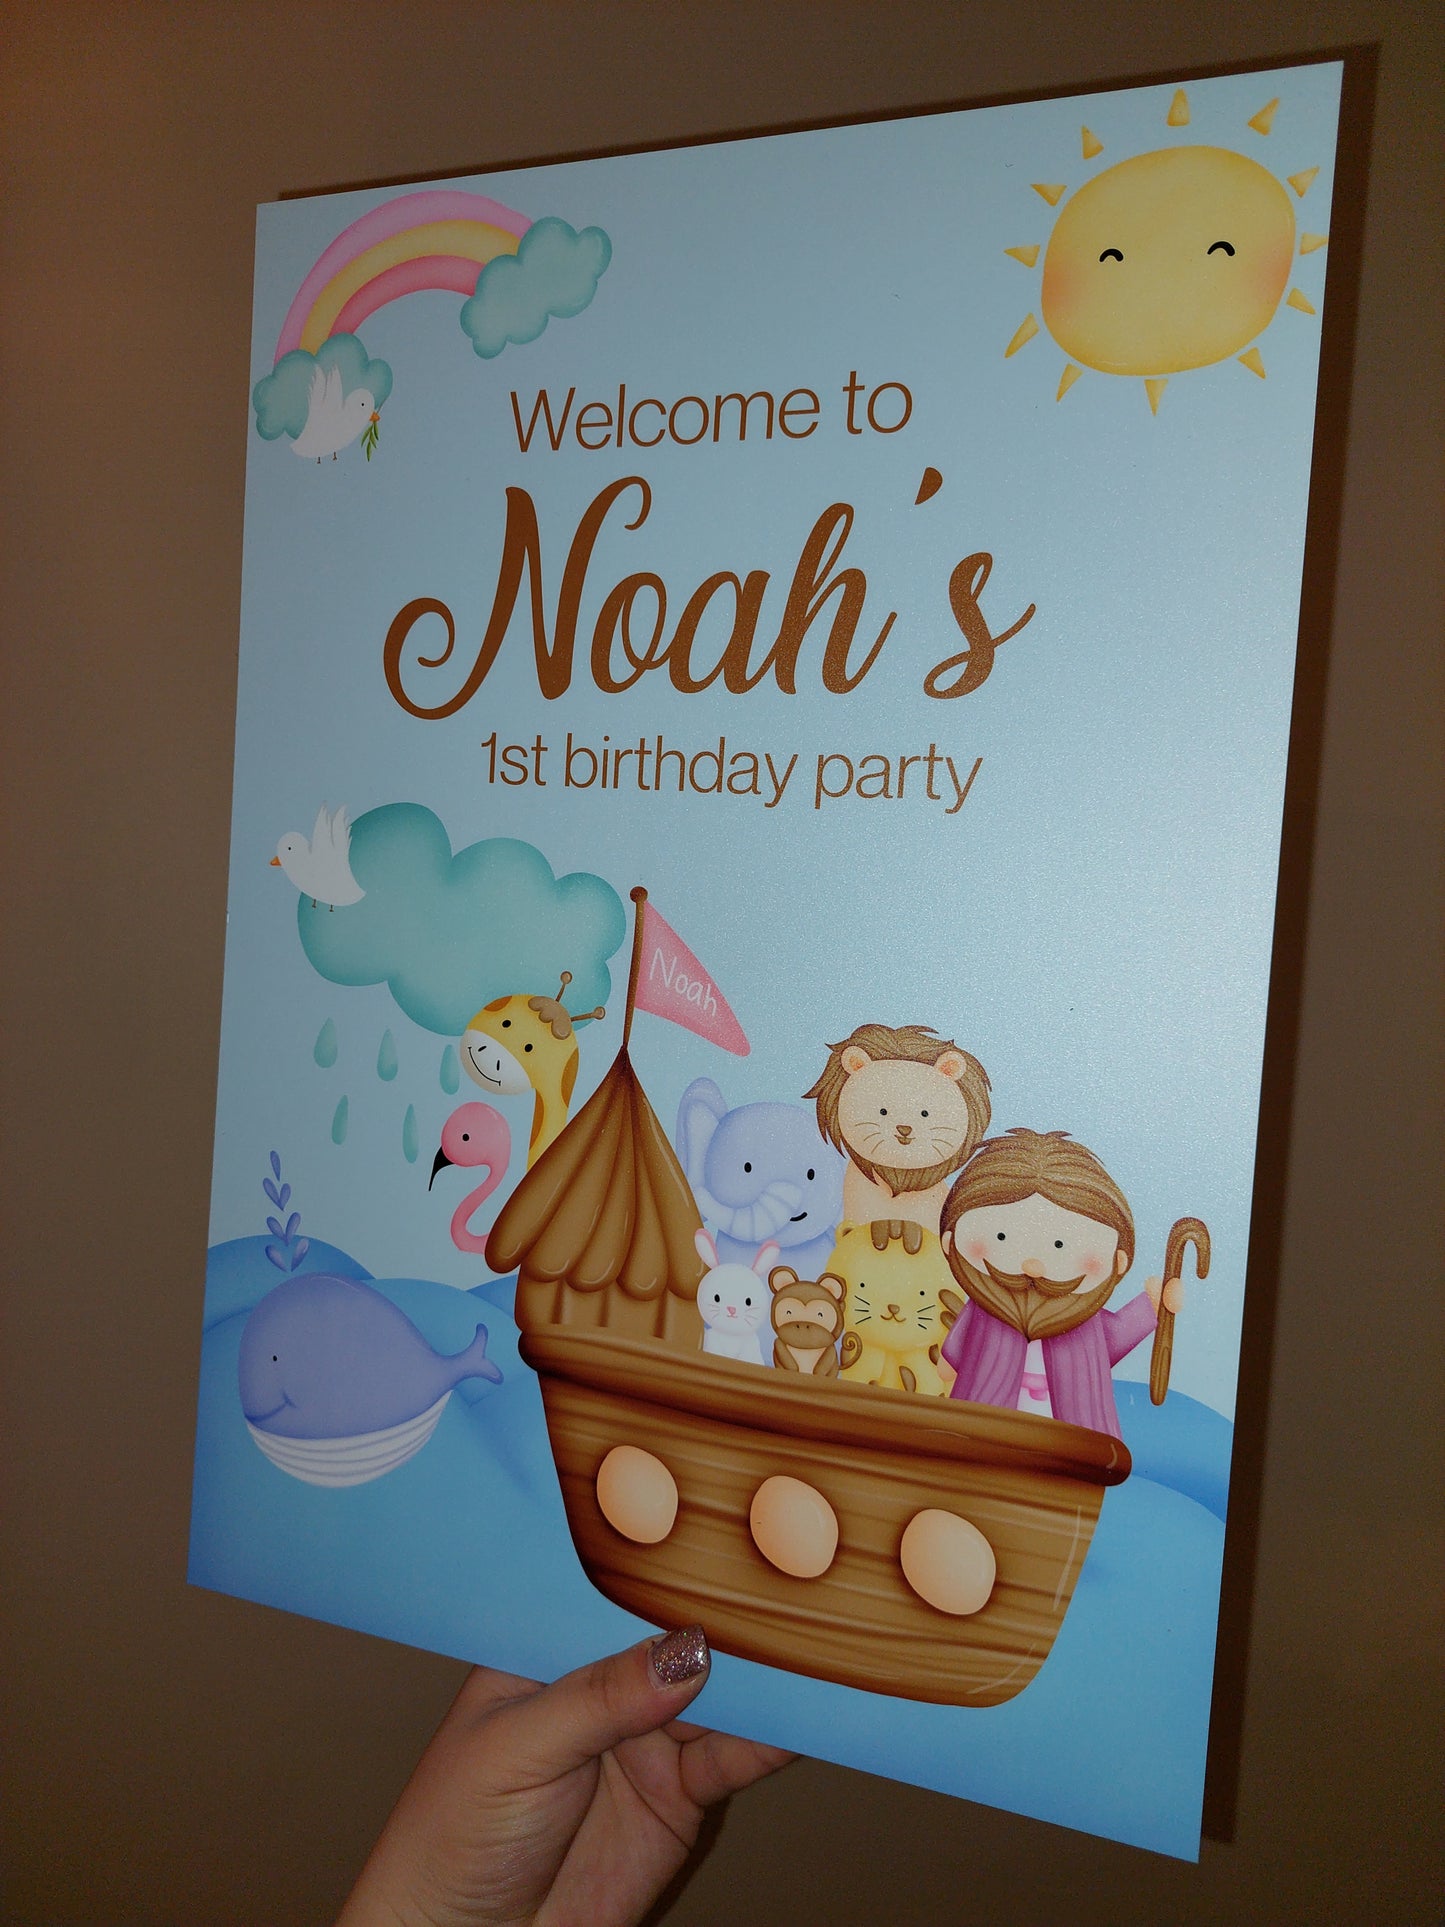 Noah's Ark Theme Welcome Board Sign | Personalised Birthday Board | Birthday Party Sign | A4, A3, A2